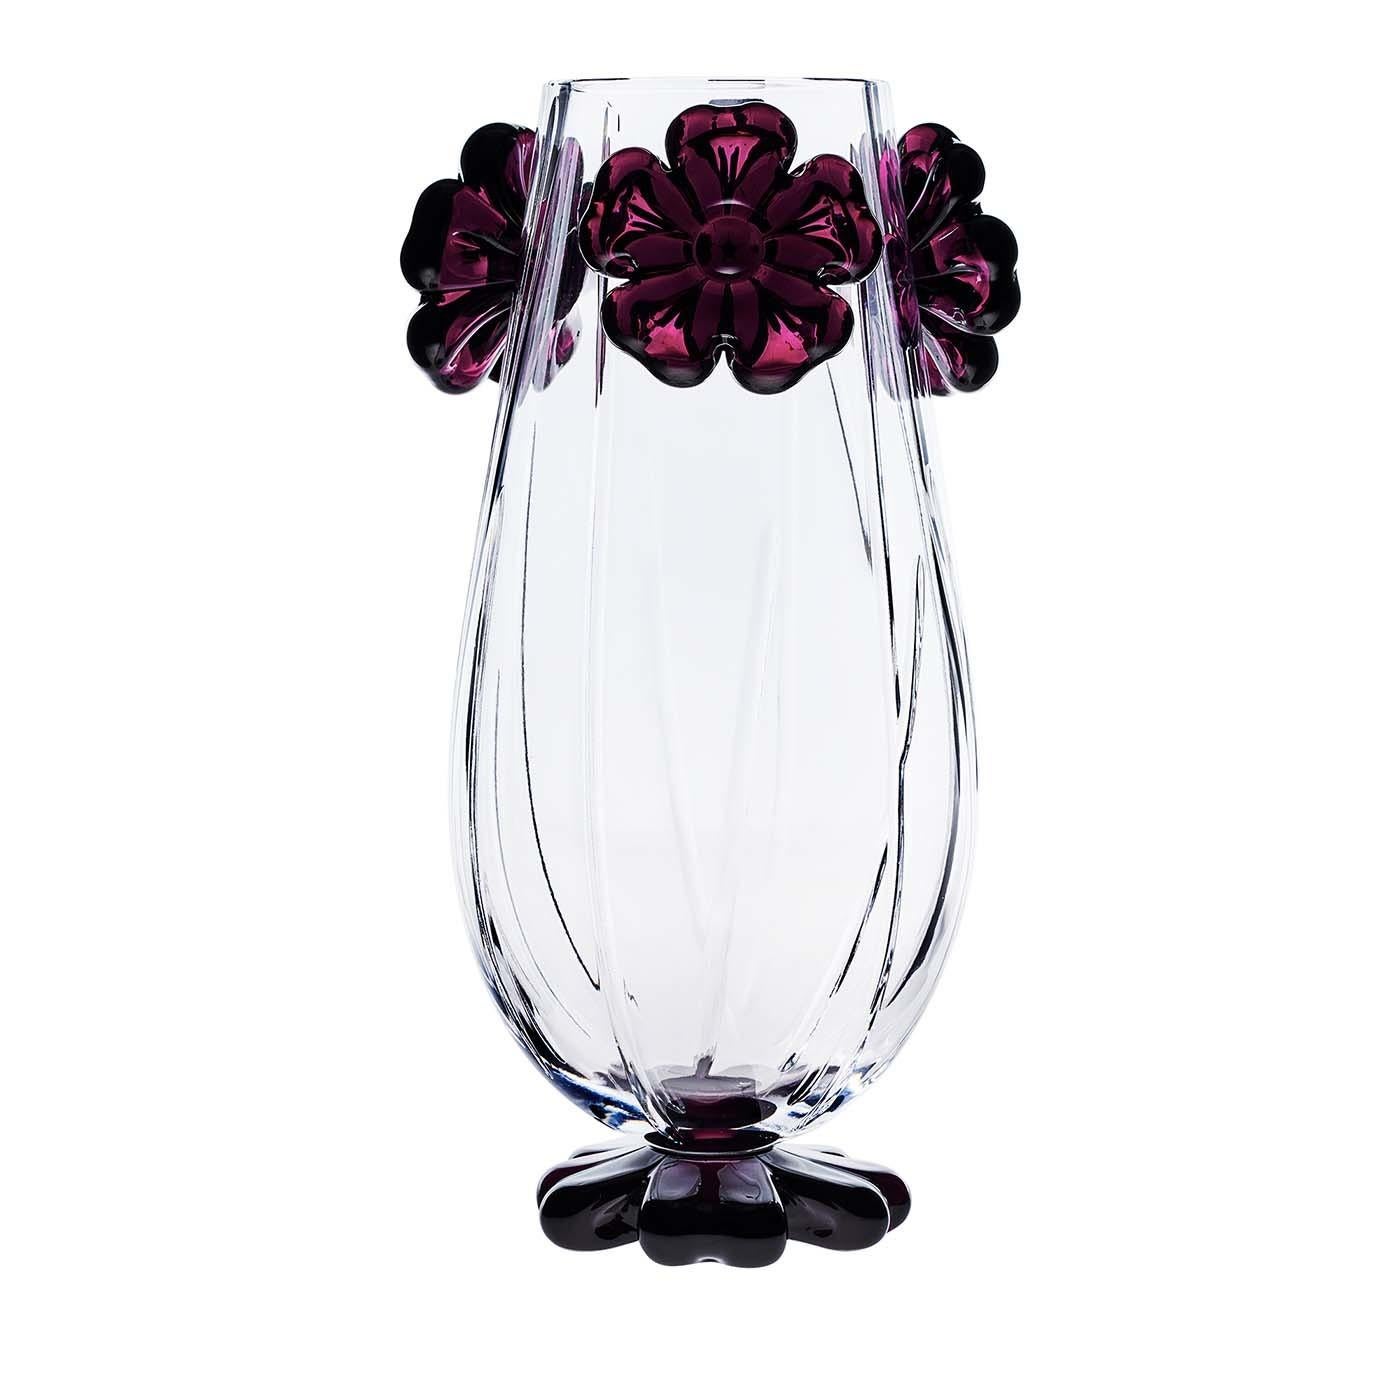 A superb example of exquisite craftsmanship, this vase was entirely handmade and is a work of art that can be displayed anywhere in a classic or modern home. It comprises a delicately curved body of transparent crystal with a base and four top